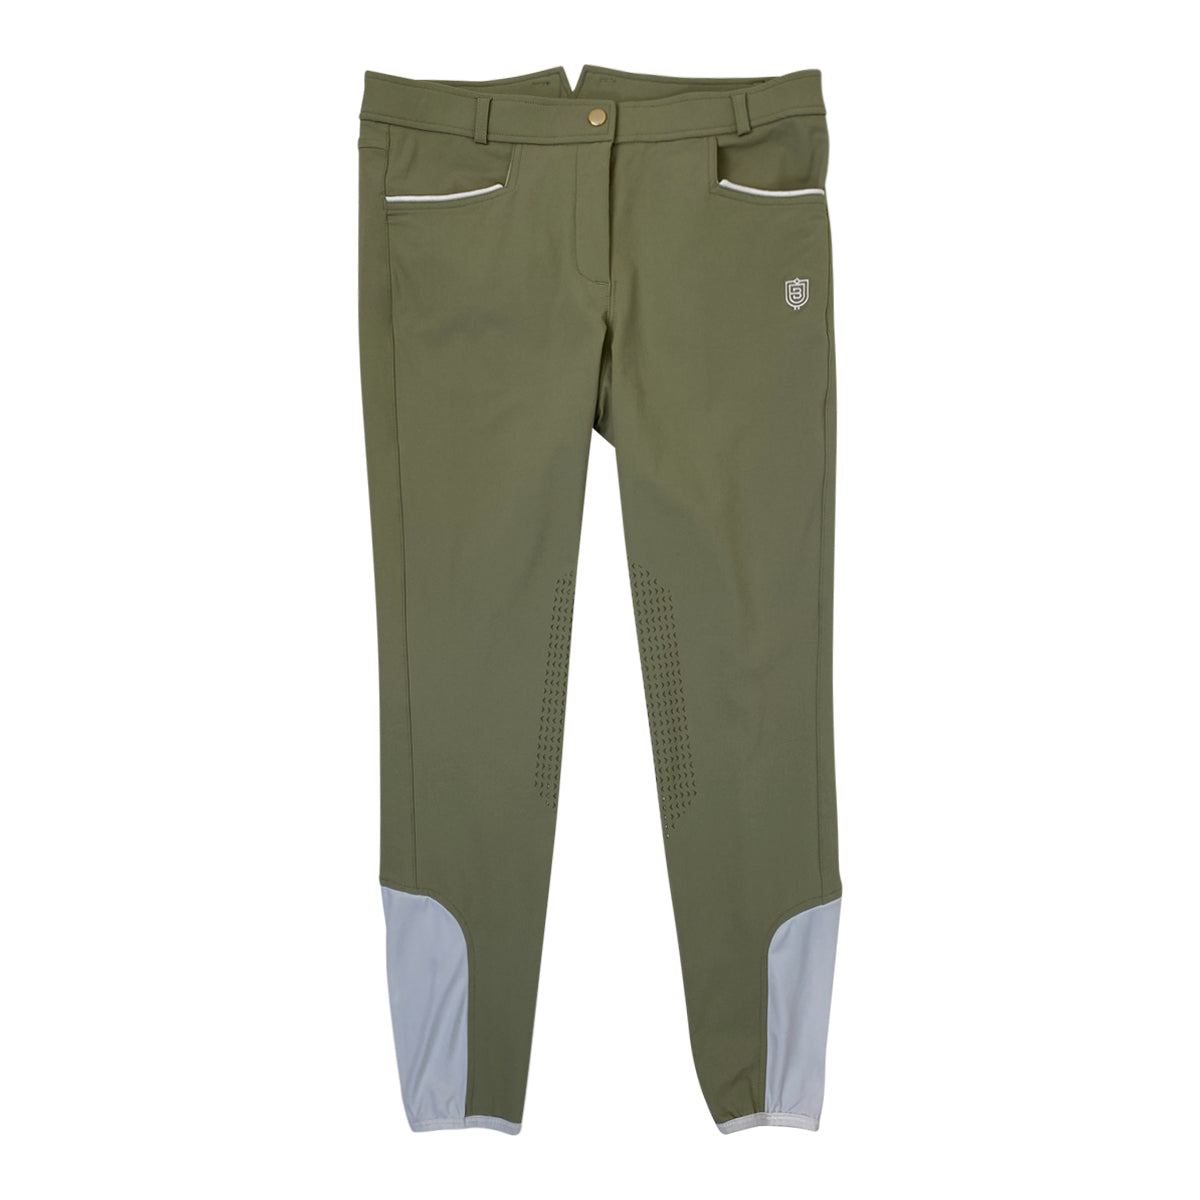 Bullet Equestrian 'The Original' Knee Grip Breeches in Sage/White Piping